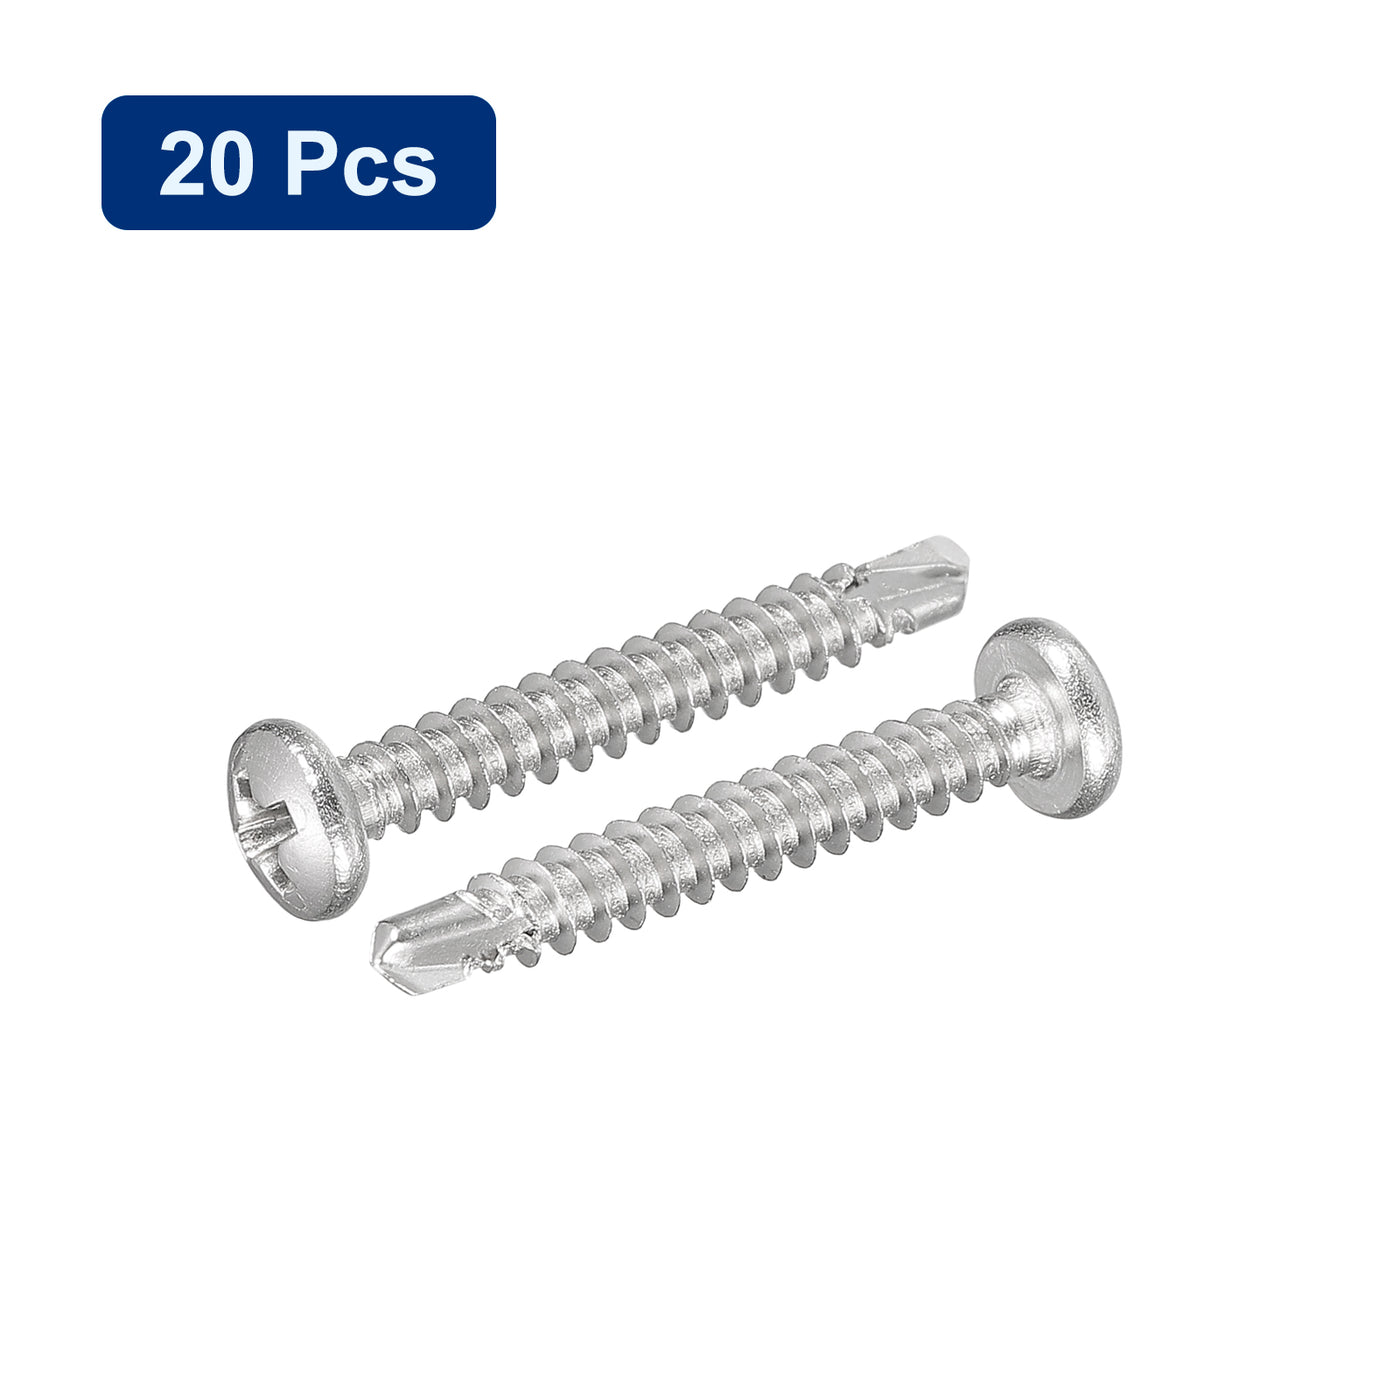 uxcell Uxcell #6 x 1" Self Drilling Screws, 20pcs Phillips Pan Head Self Tapping Screws